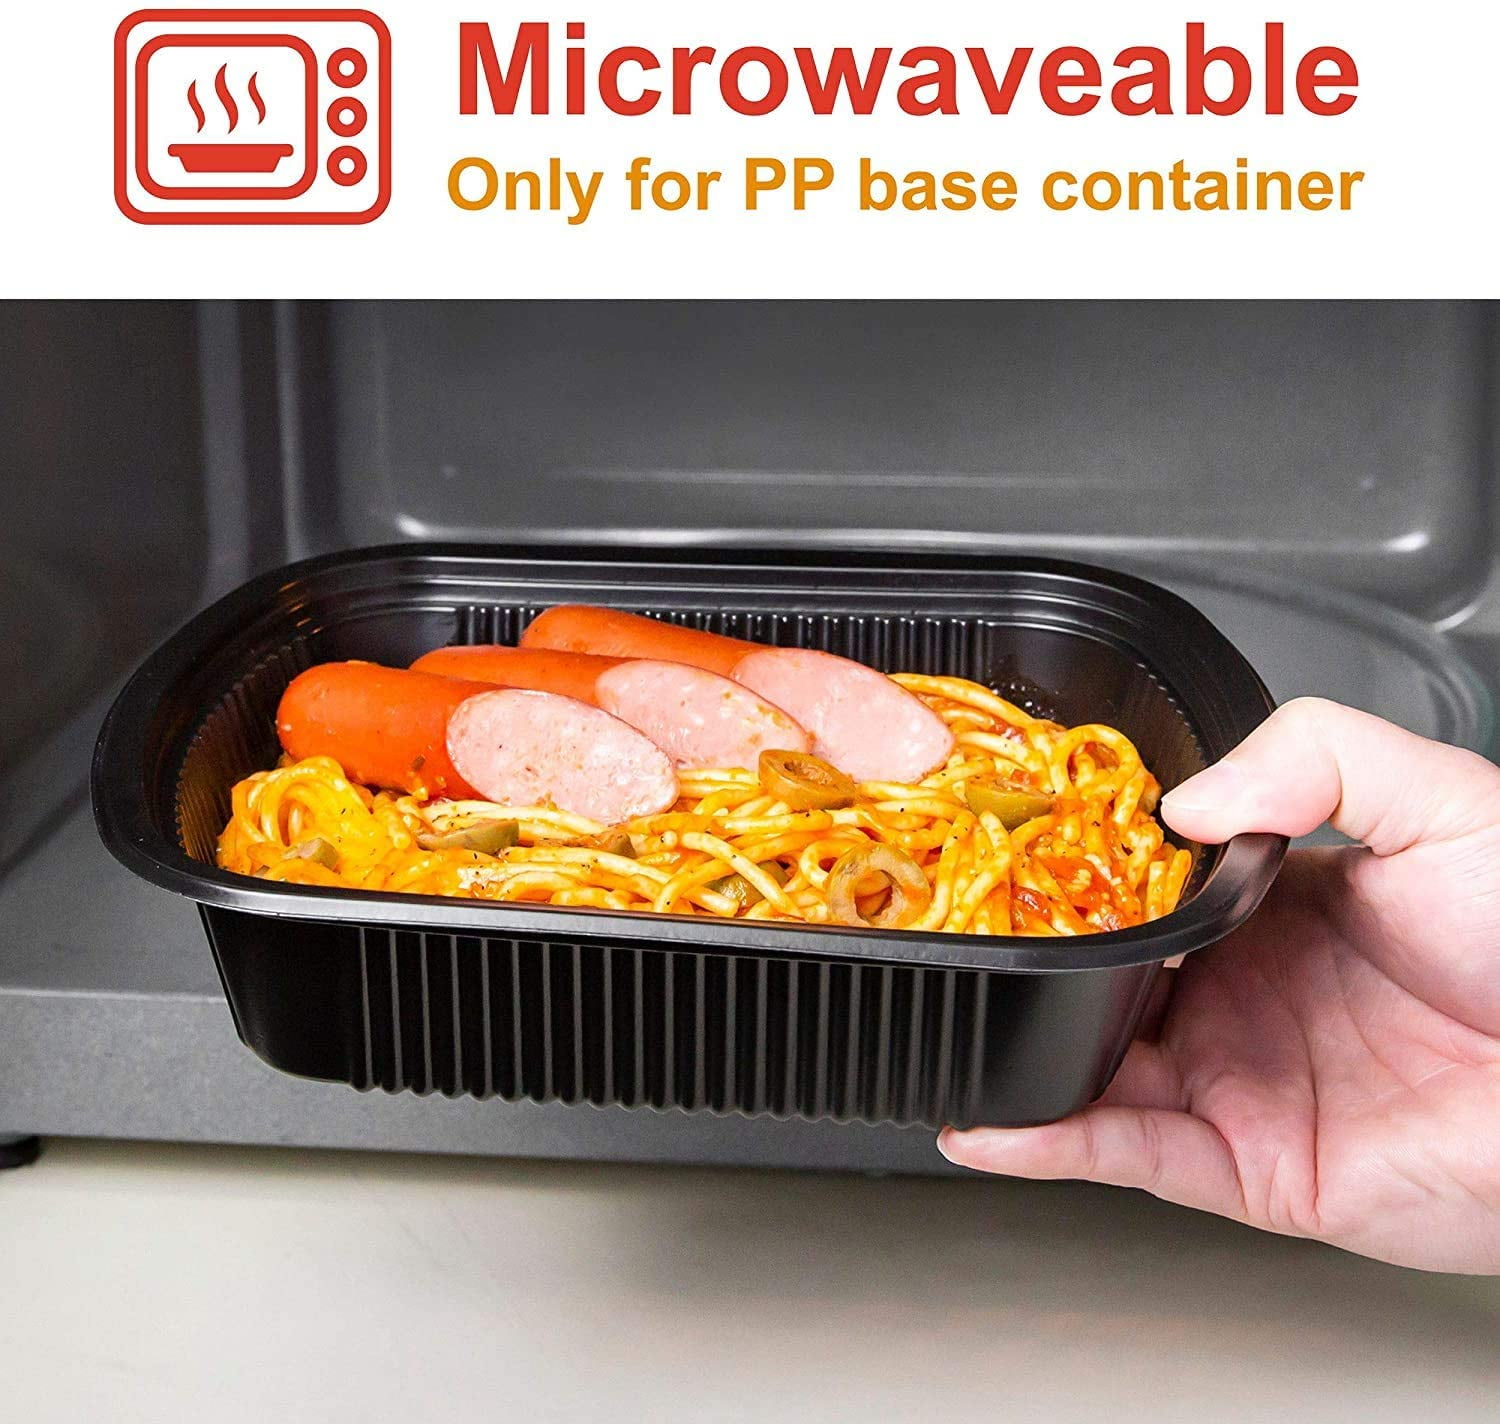 Prep & Savour Blinkhorn Disposable Plastic Food Container for 100